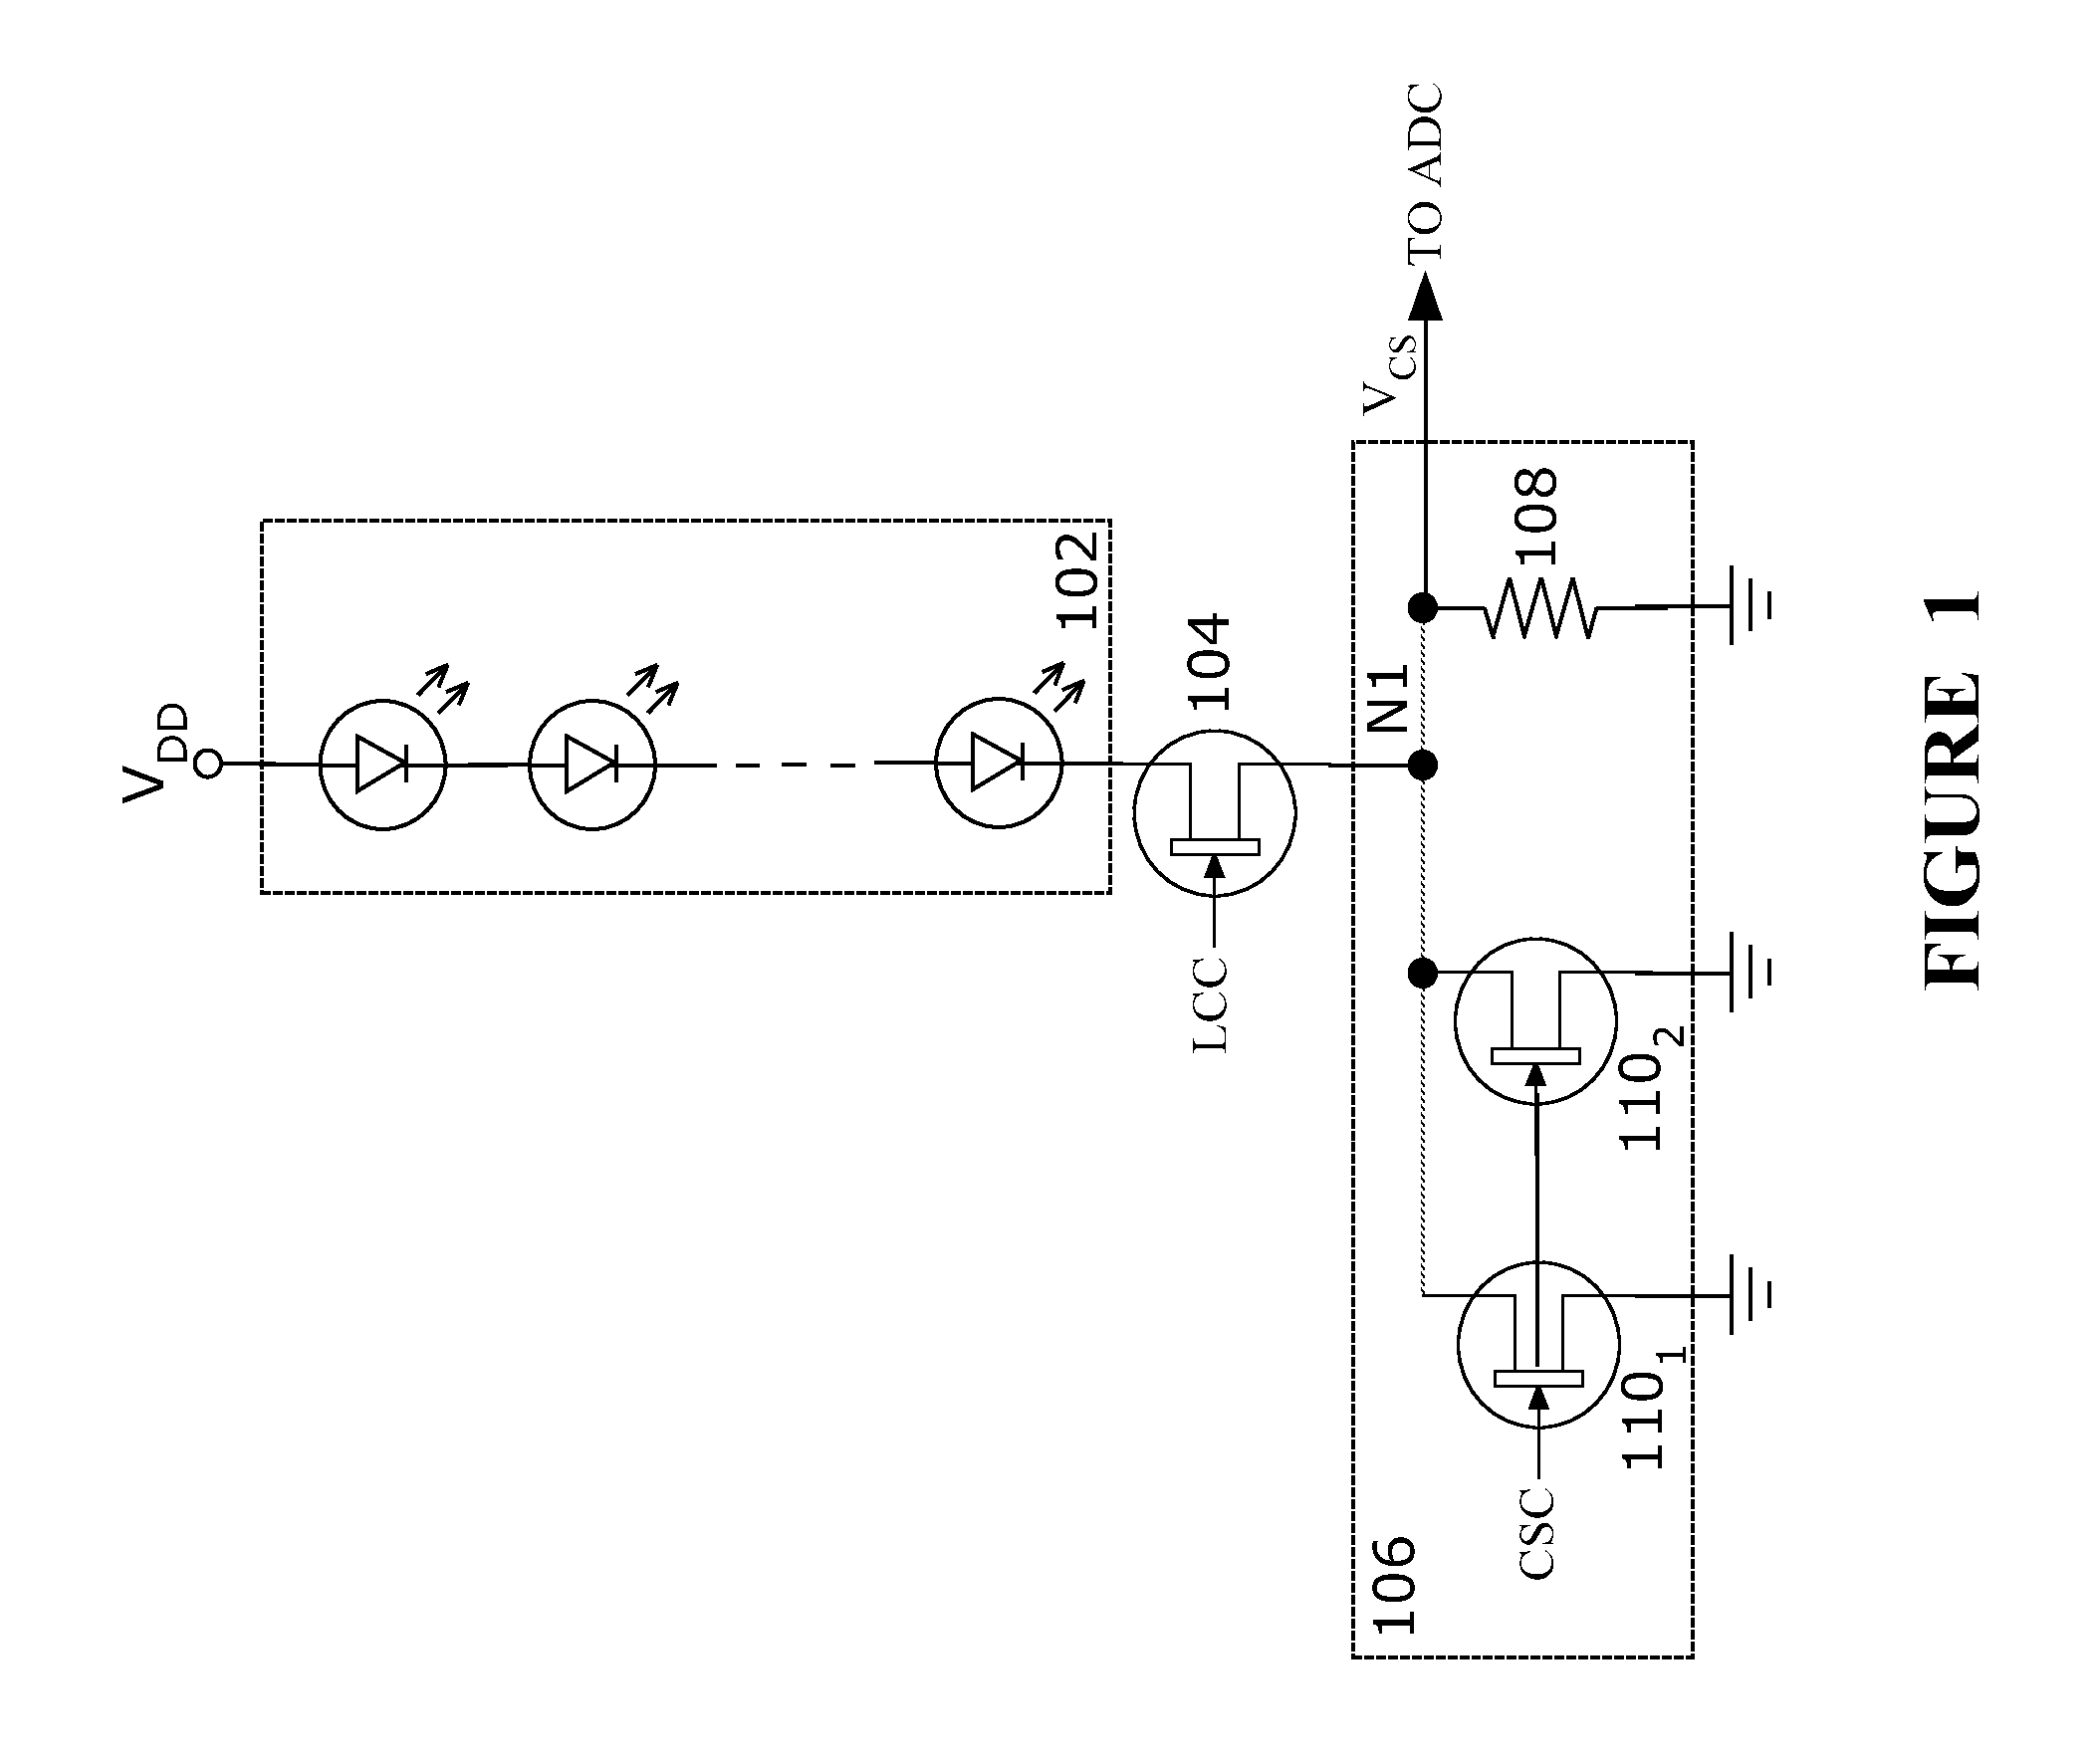 Circuits for sensing current levels within a lighting apparatus incorporating a voltage converter